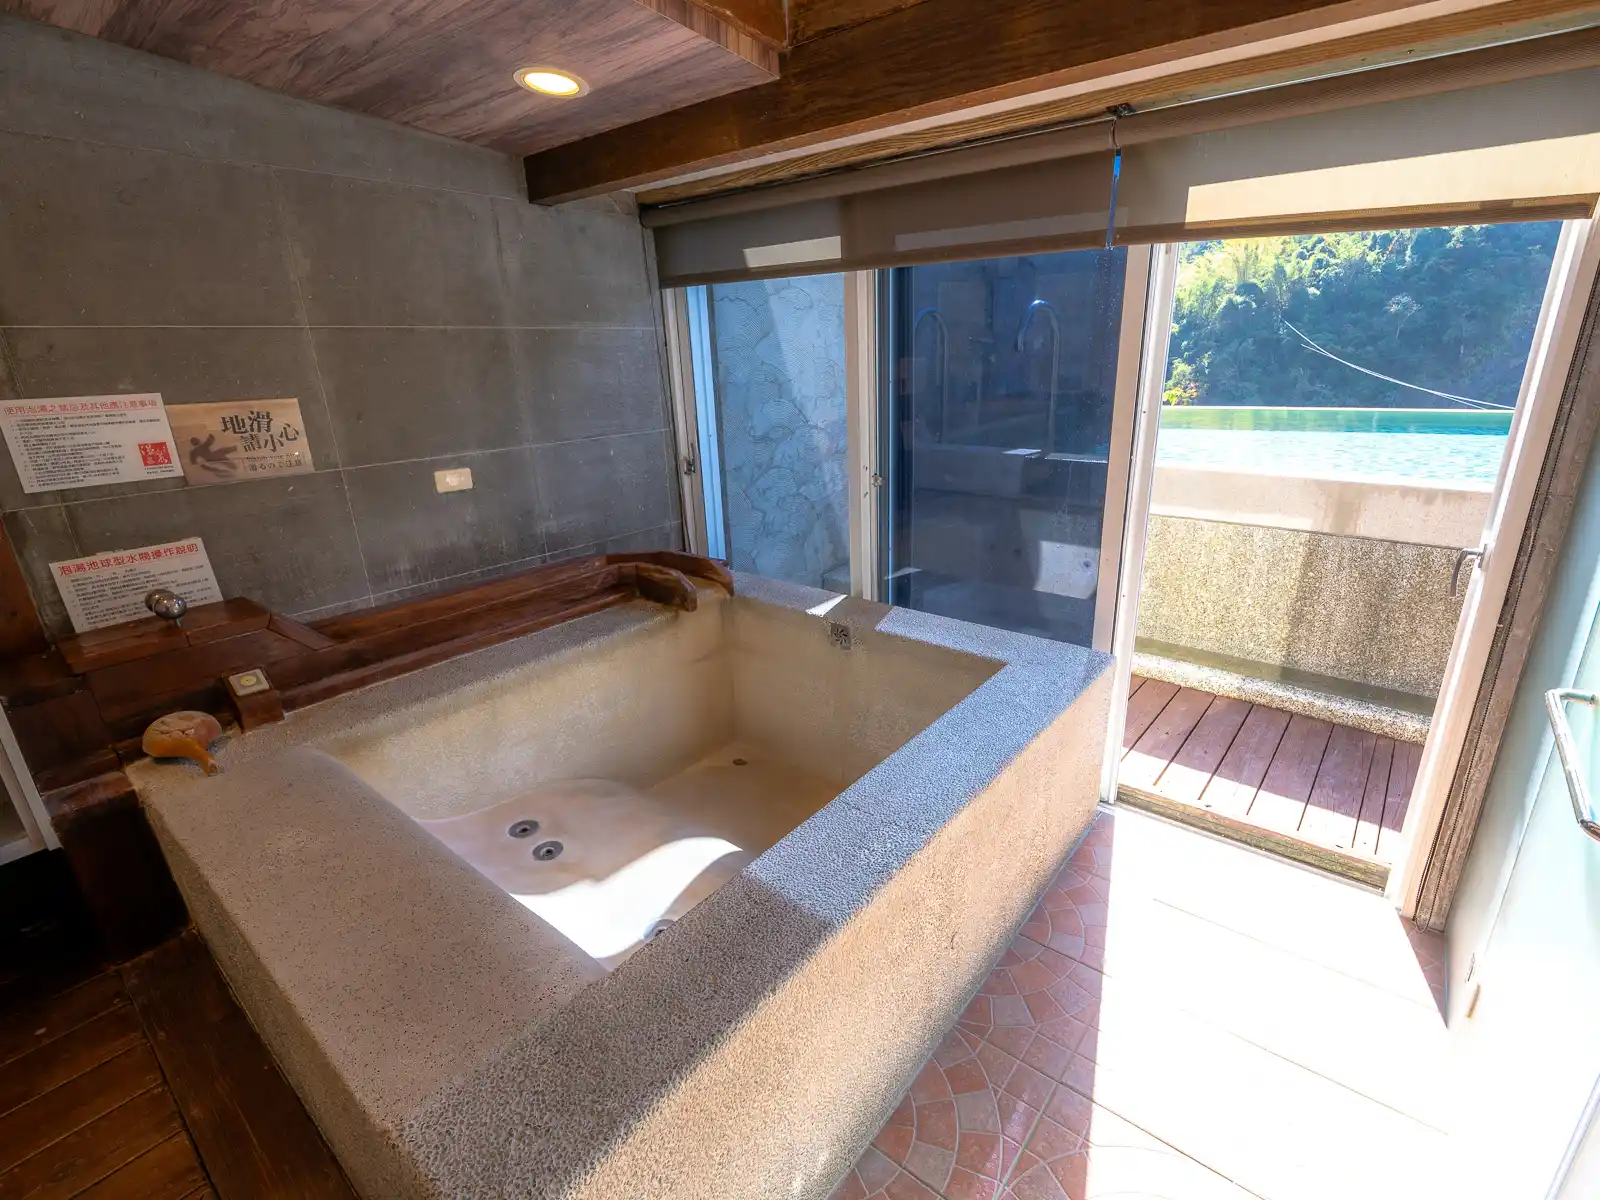 A sculpted indoor hot spring tub with jets looks out on a balcony and nature outside.